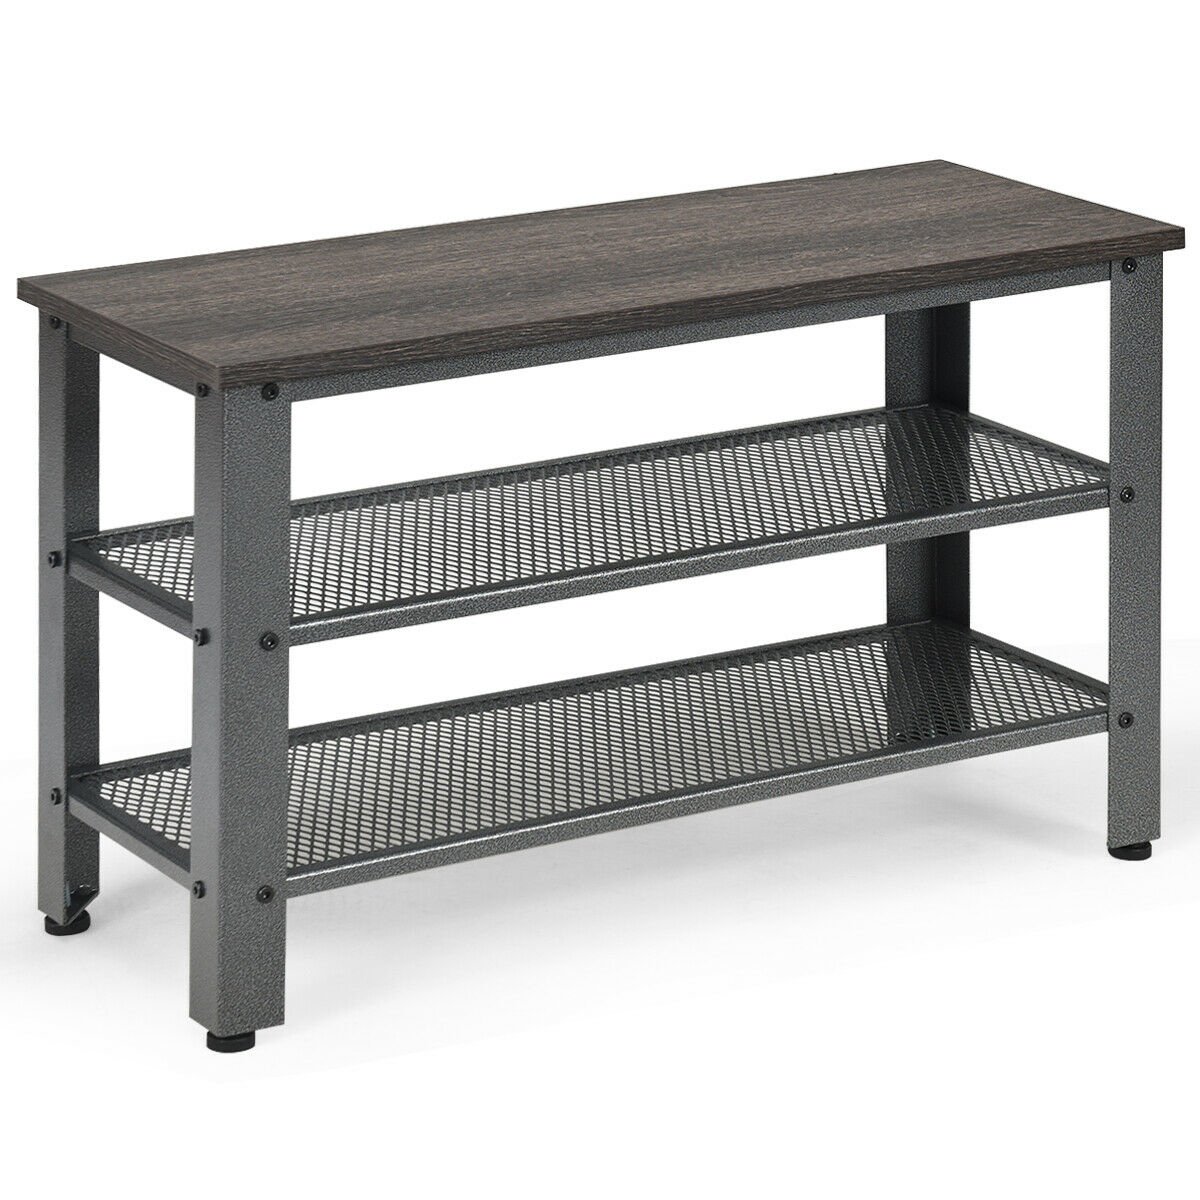 3-Tier Shoe Rack Industrial Shoe Bench With Storage Shelves For LivingRoom - Silver And Brown